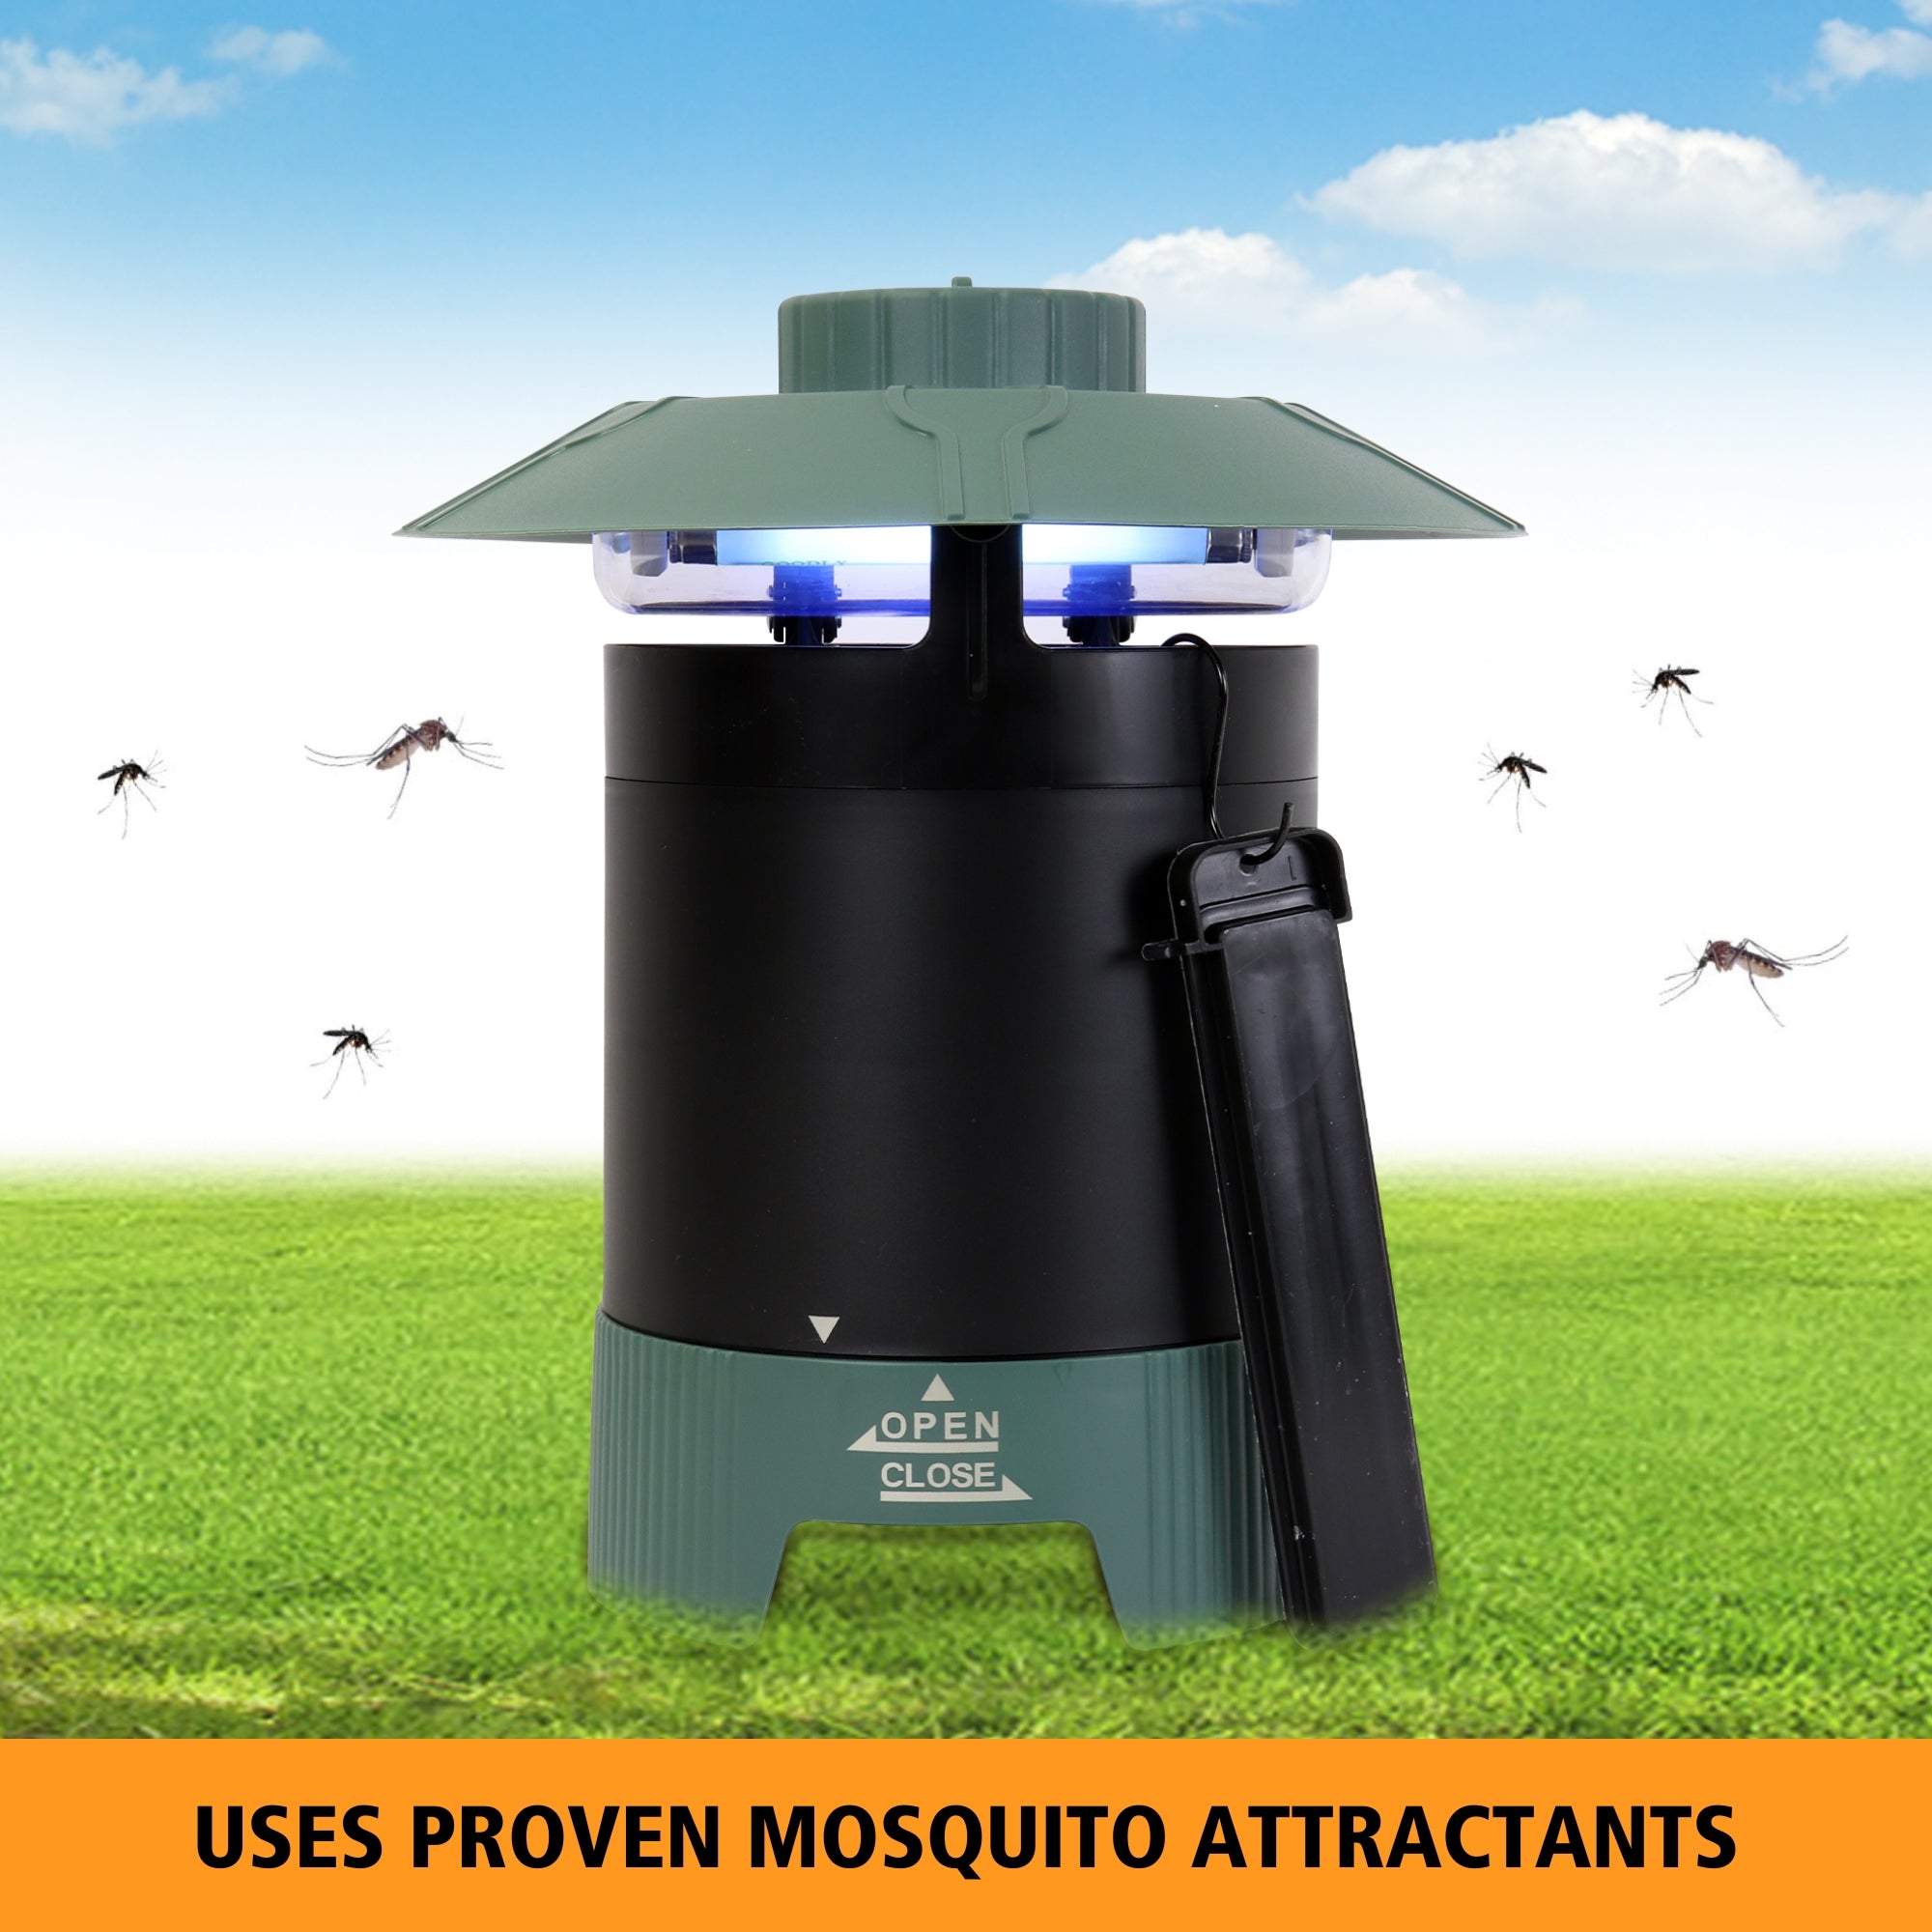 Bite Shield Protector 1/4 acre mosquito trap with grass below and blue sky in the background and mosquitoes flying towards it from either side. Text below reads, "Uses proven mosquito attractants."